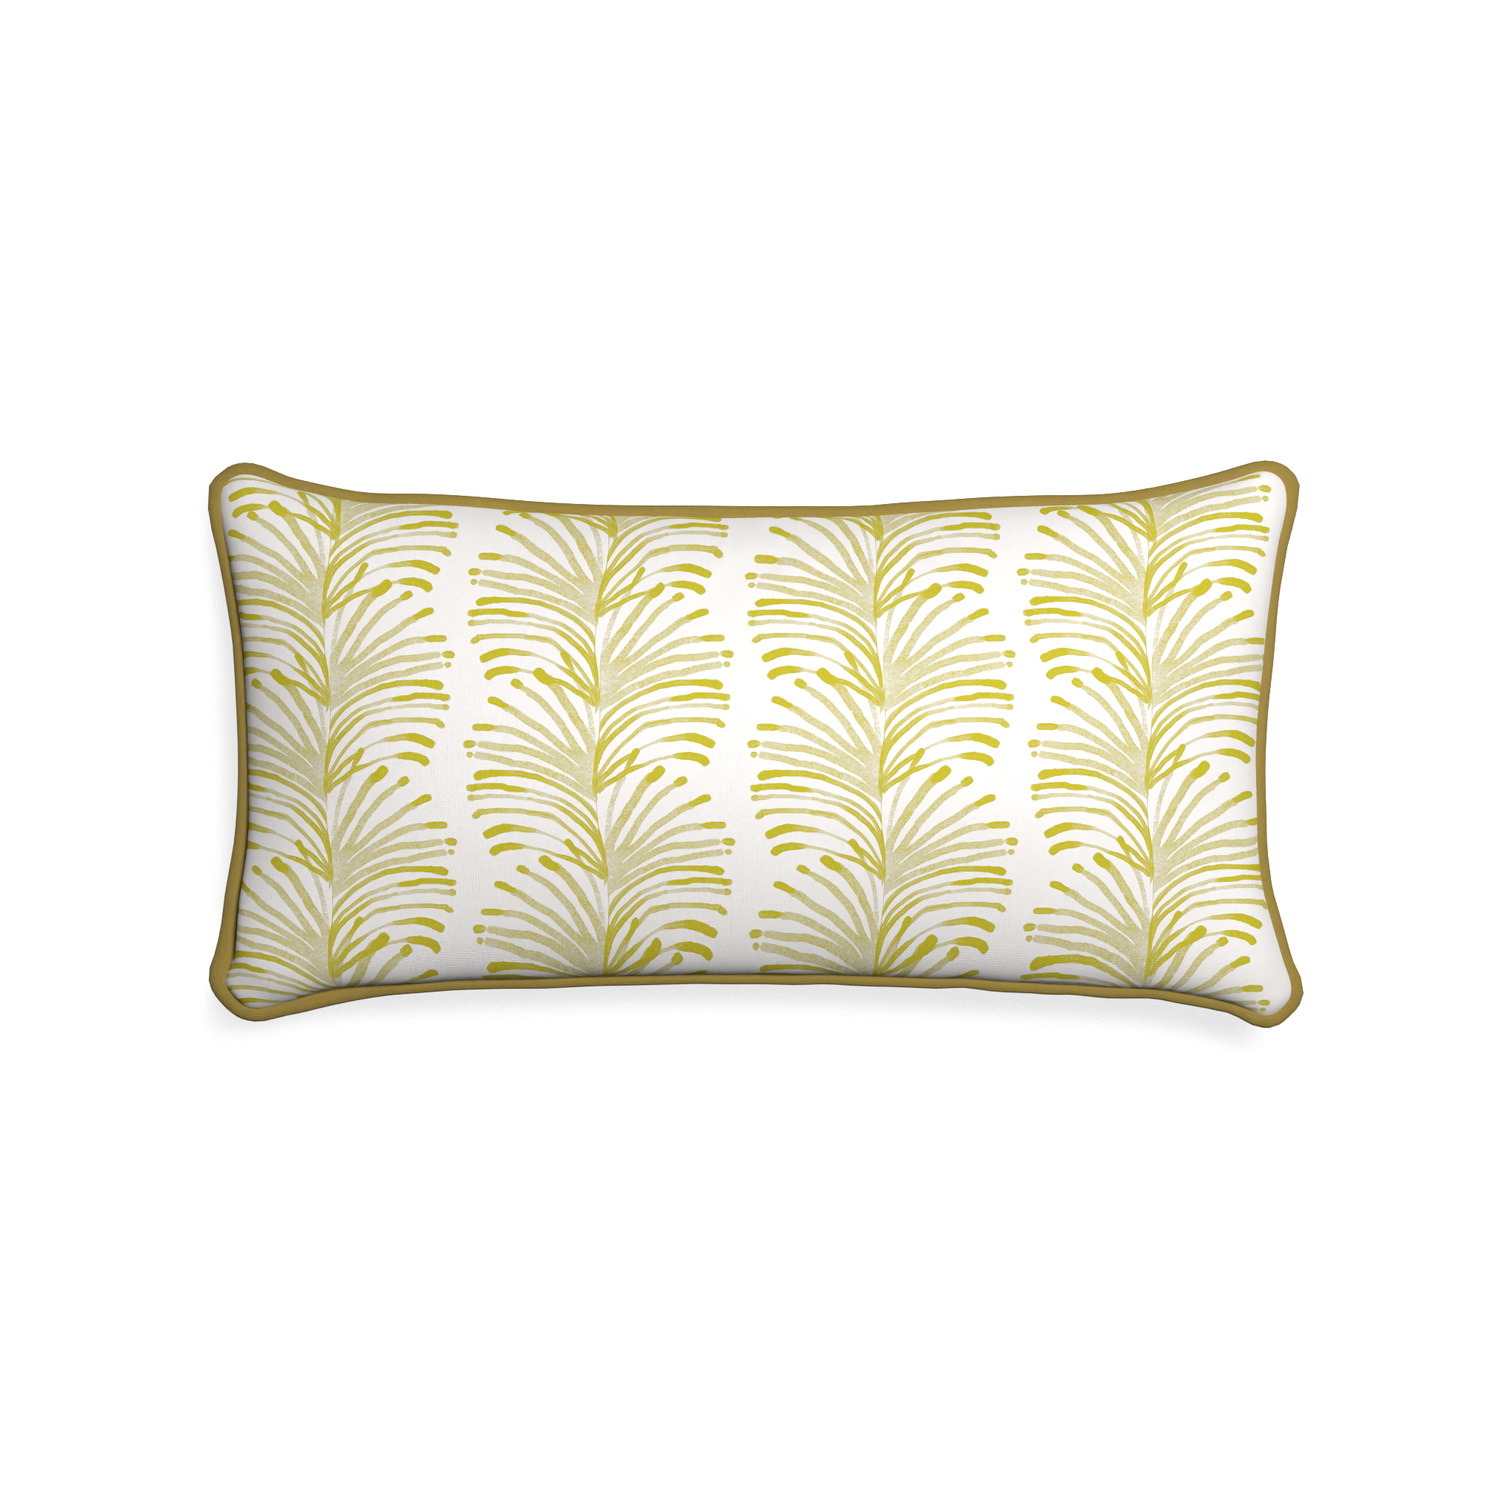 Midi-lumbar emma chartreuse custom yellow stripe chartreusepillow with c piping on white background